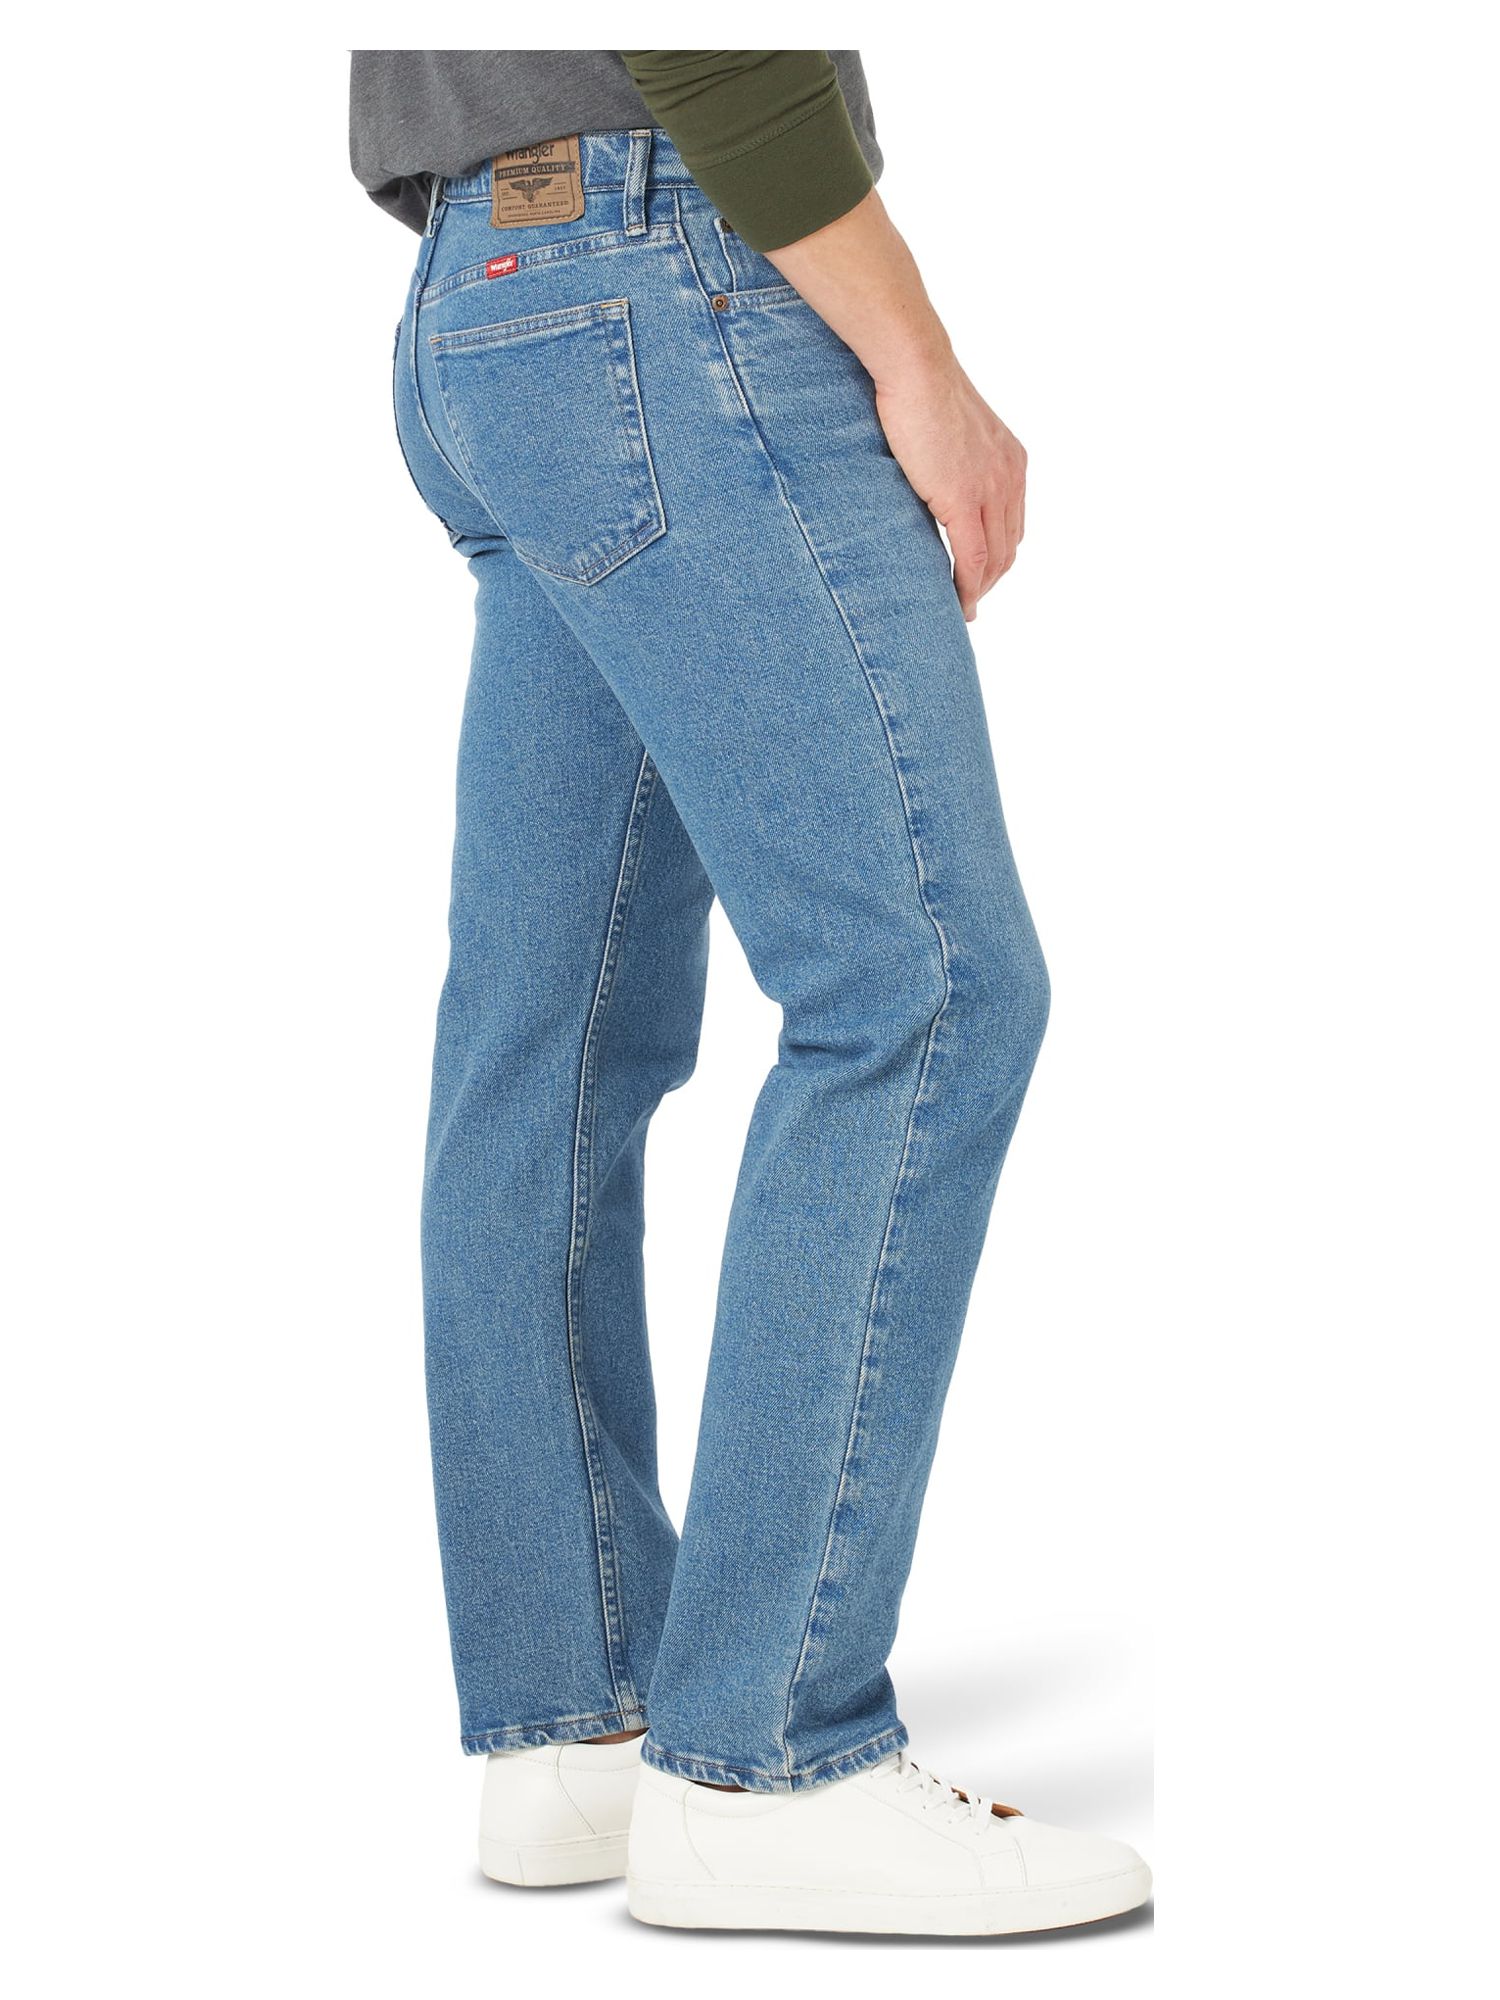 Wrangler Men's and Big Men's Relaxed Fit Jeans with Flex - image 5 of 7